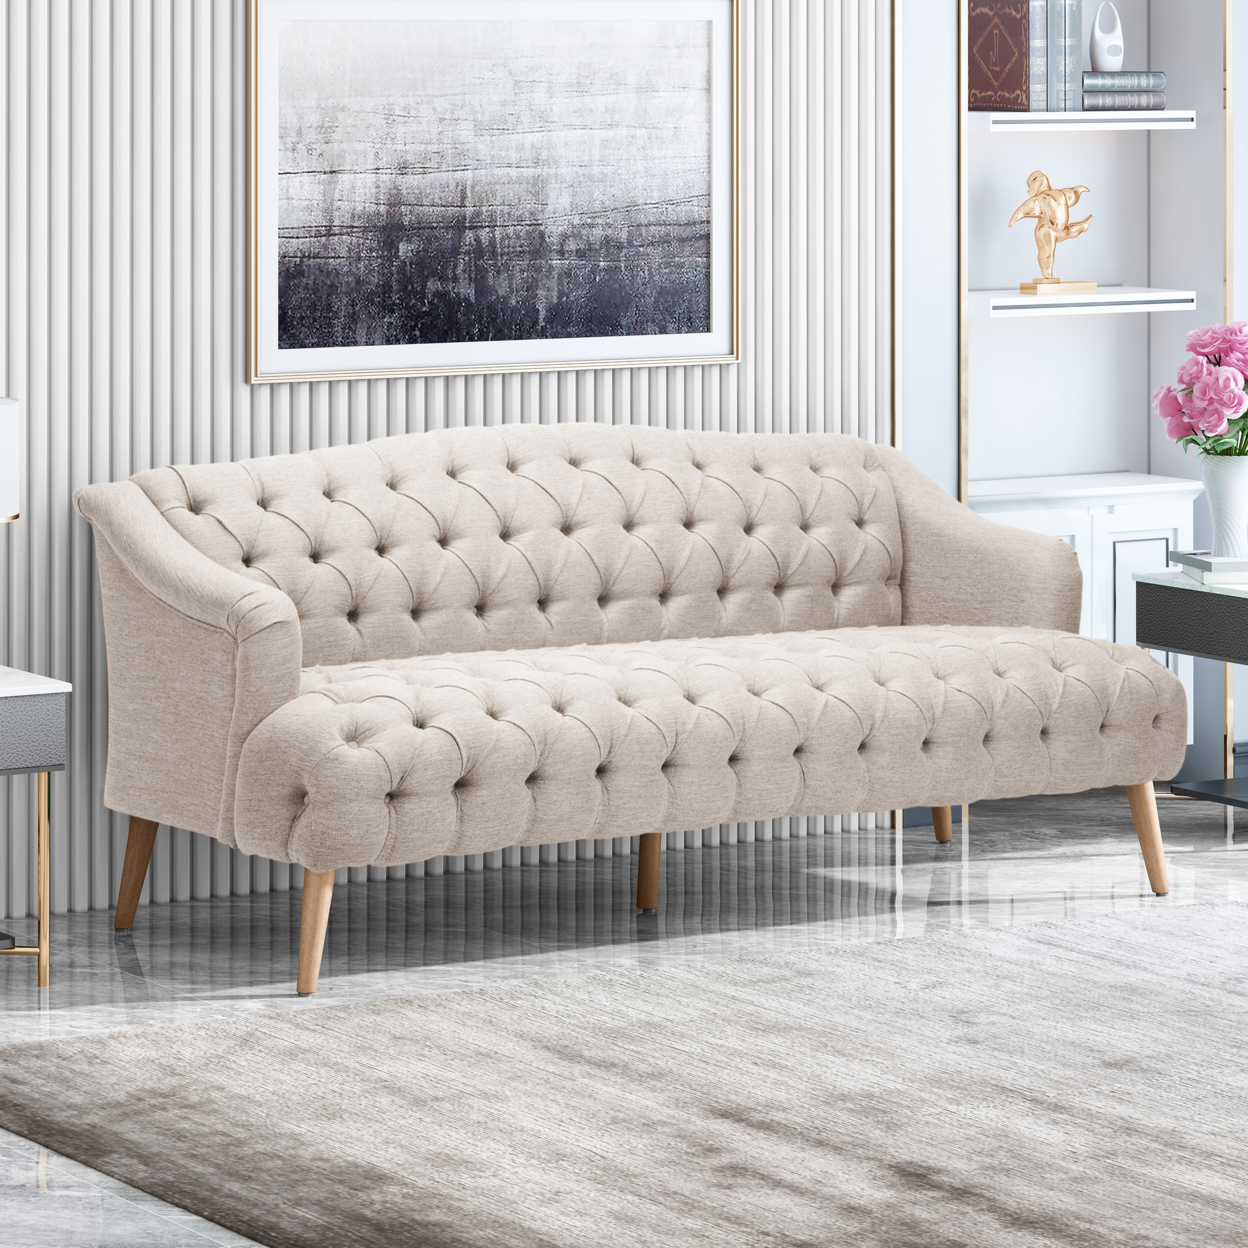 Erin Contemporary Tufted Fabric 3 Seater Sofa - Beige + Natural Finish